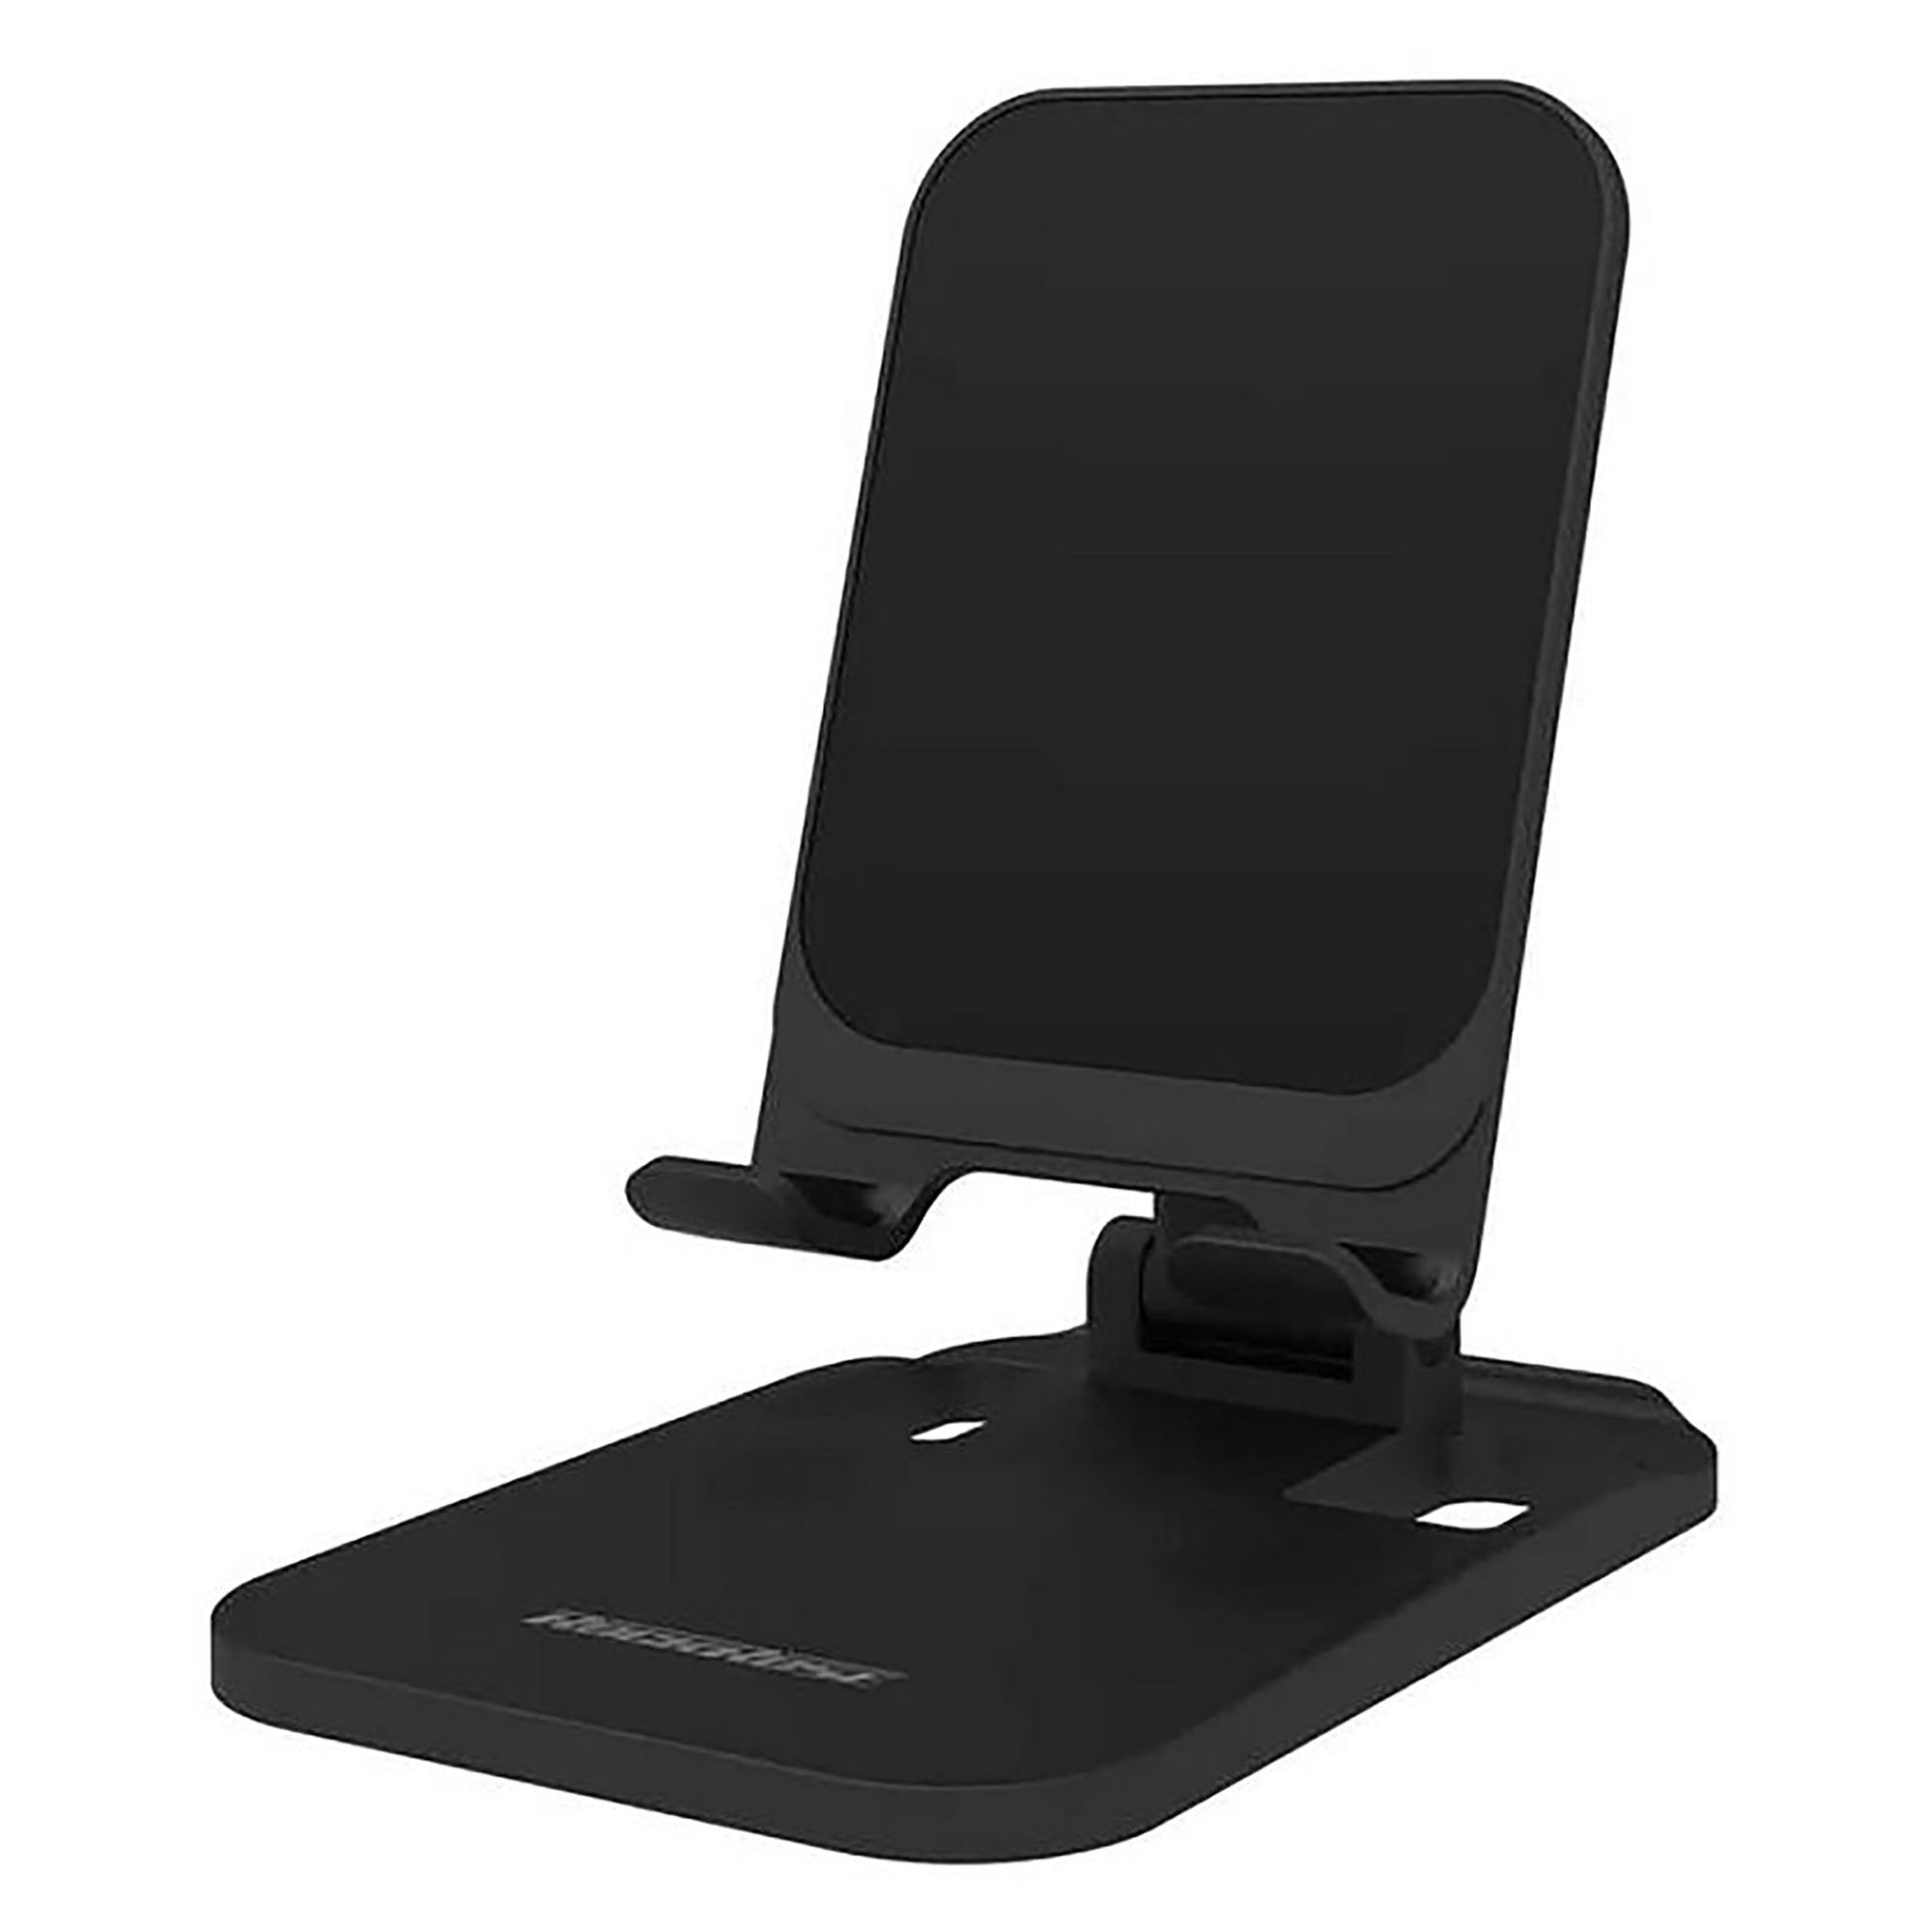 RockRose Any view Ease Foldable Desktop Phone Stand Black